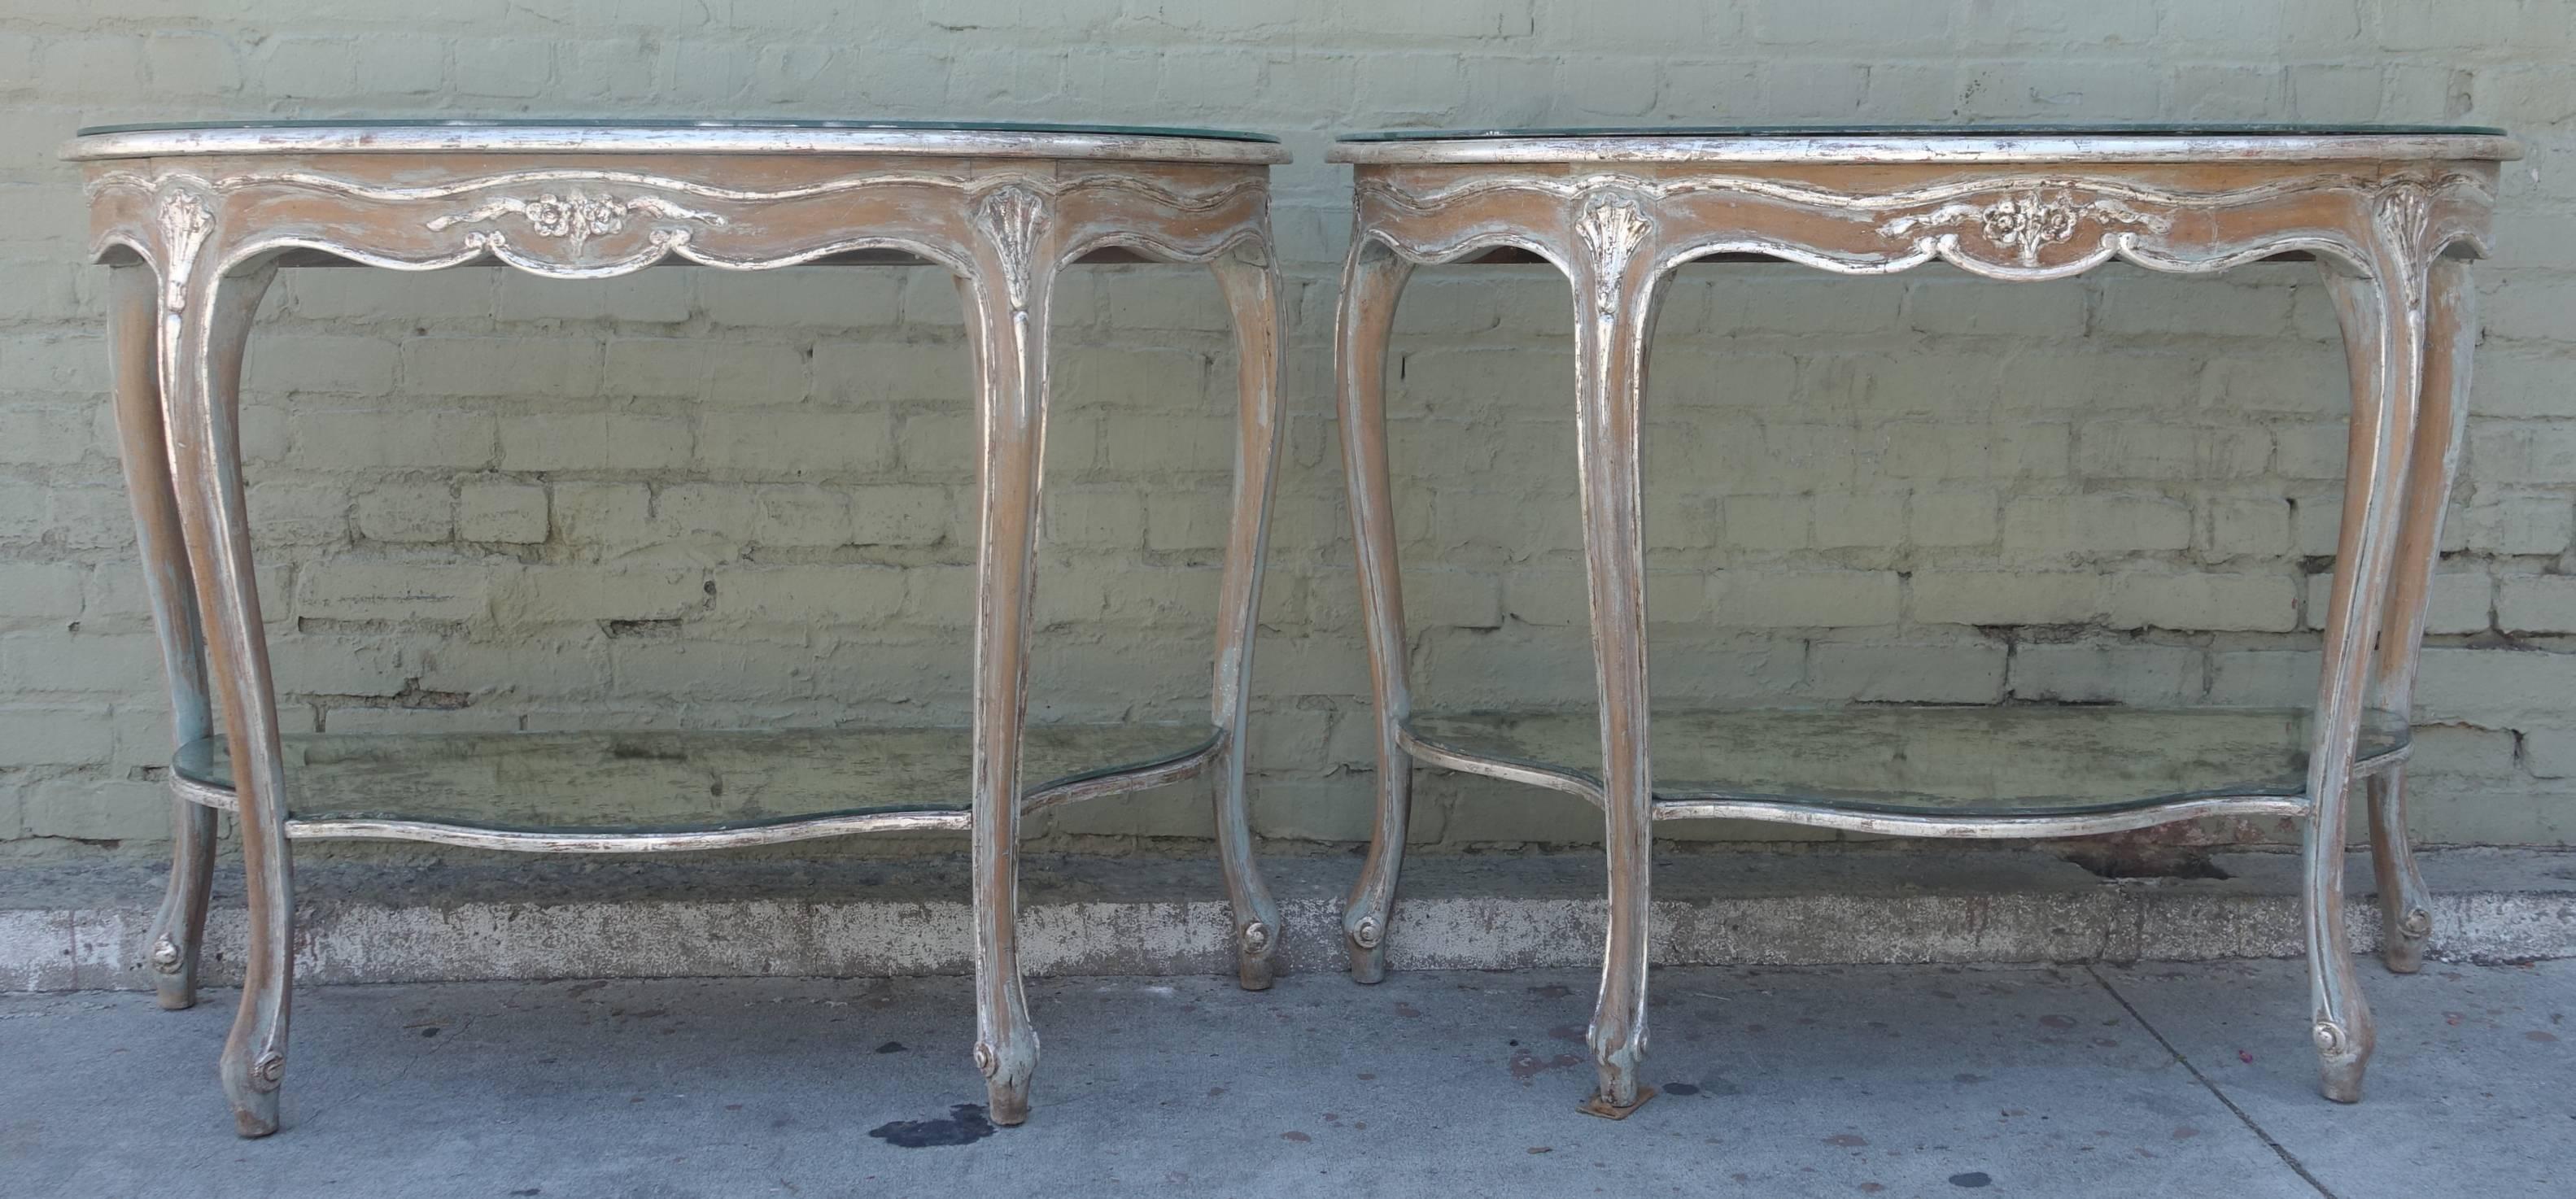 Pair of French Louis XV style painted and silver gilt consoles with bottom mirrored shelf and antiqued mirrored tops.